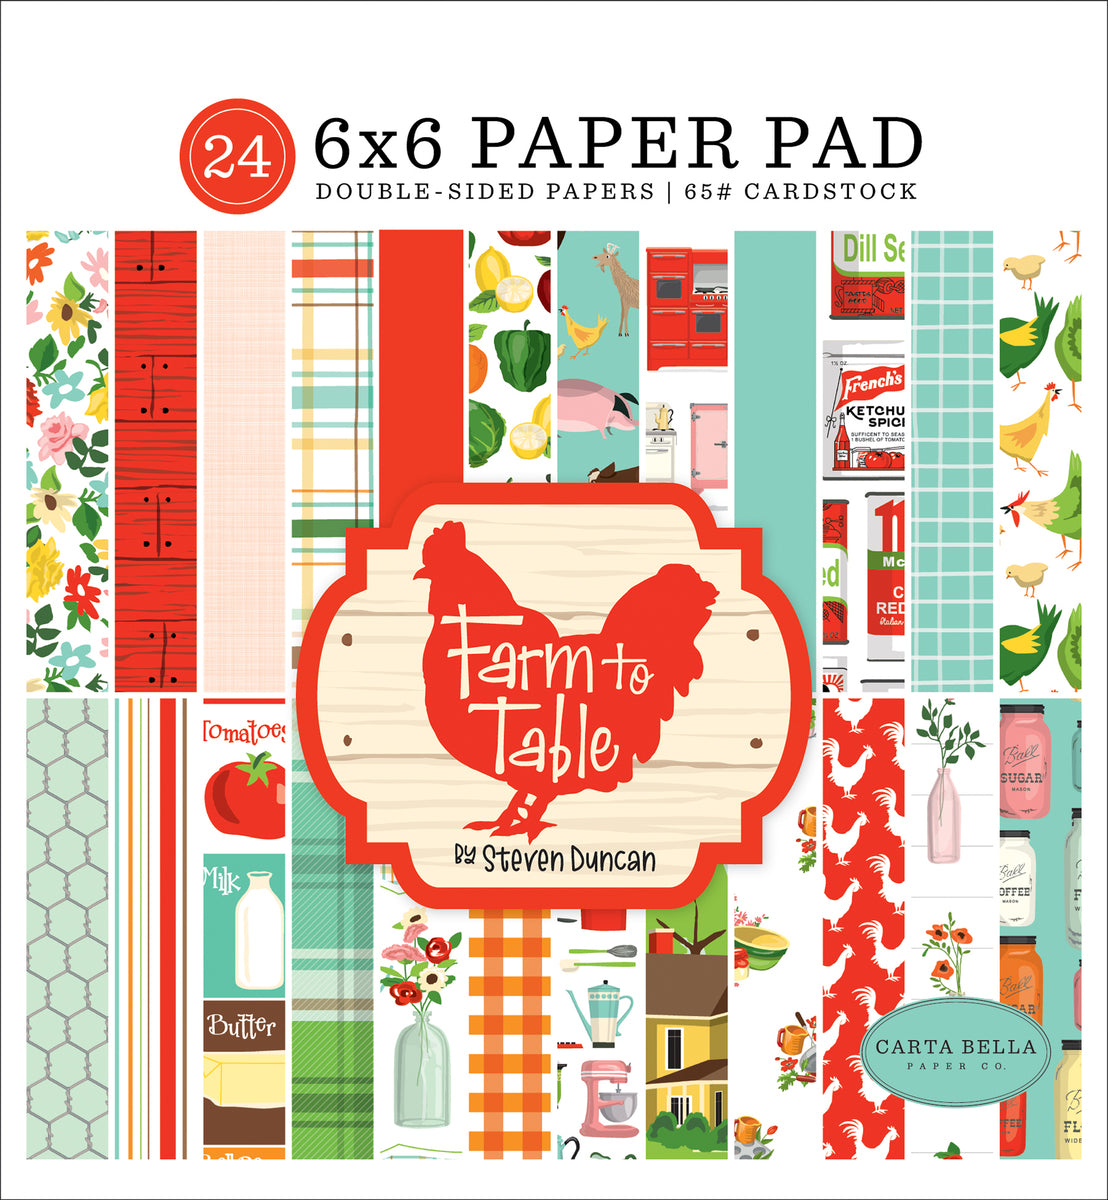 FARM TO TABLE - 6x6 paper pad with patterned, double-sided papers - Carta Bella Paper